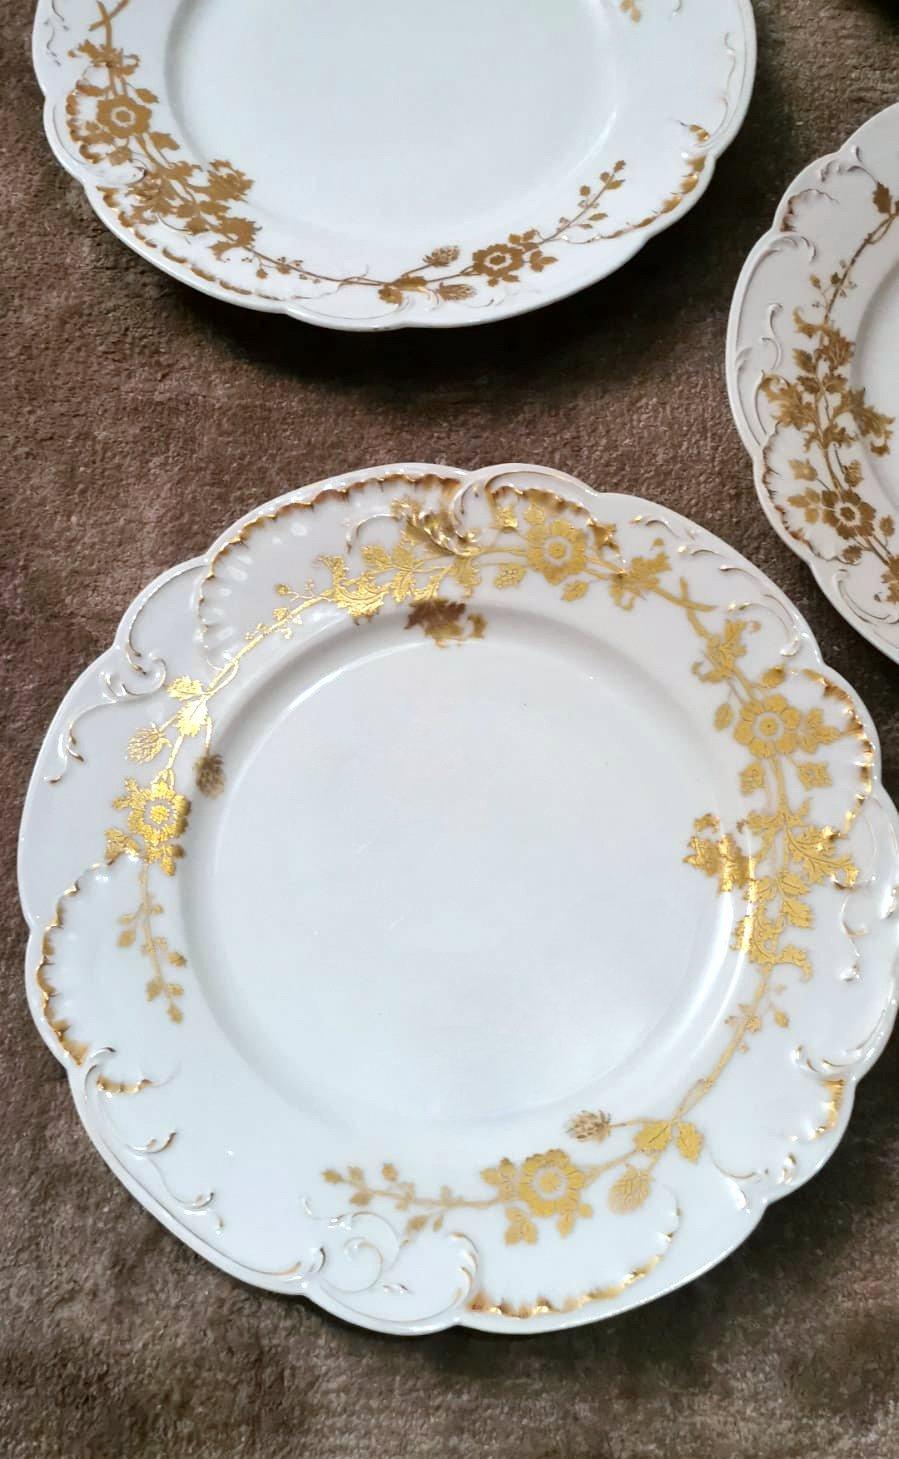 Haviland Limoges 6 French White Porcelain Flat Plates and Gold Decorations For Sale 3